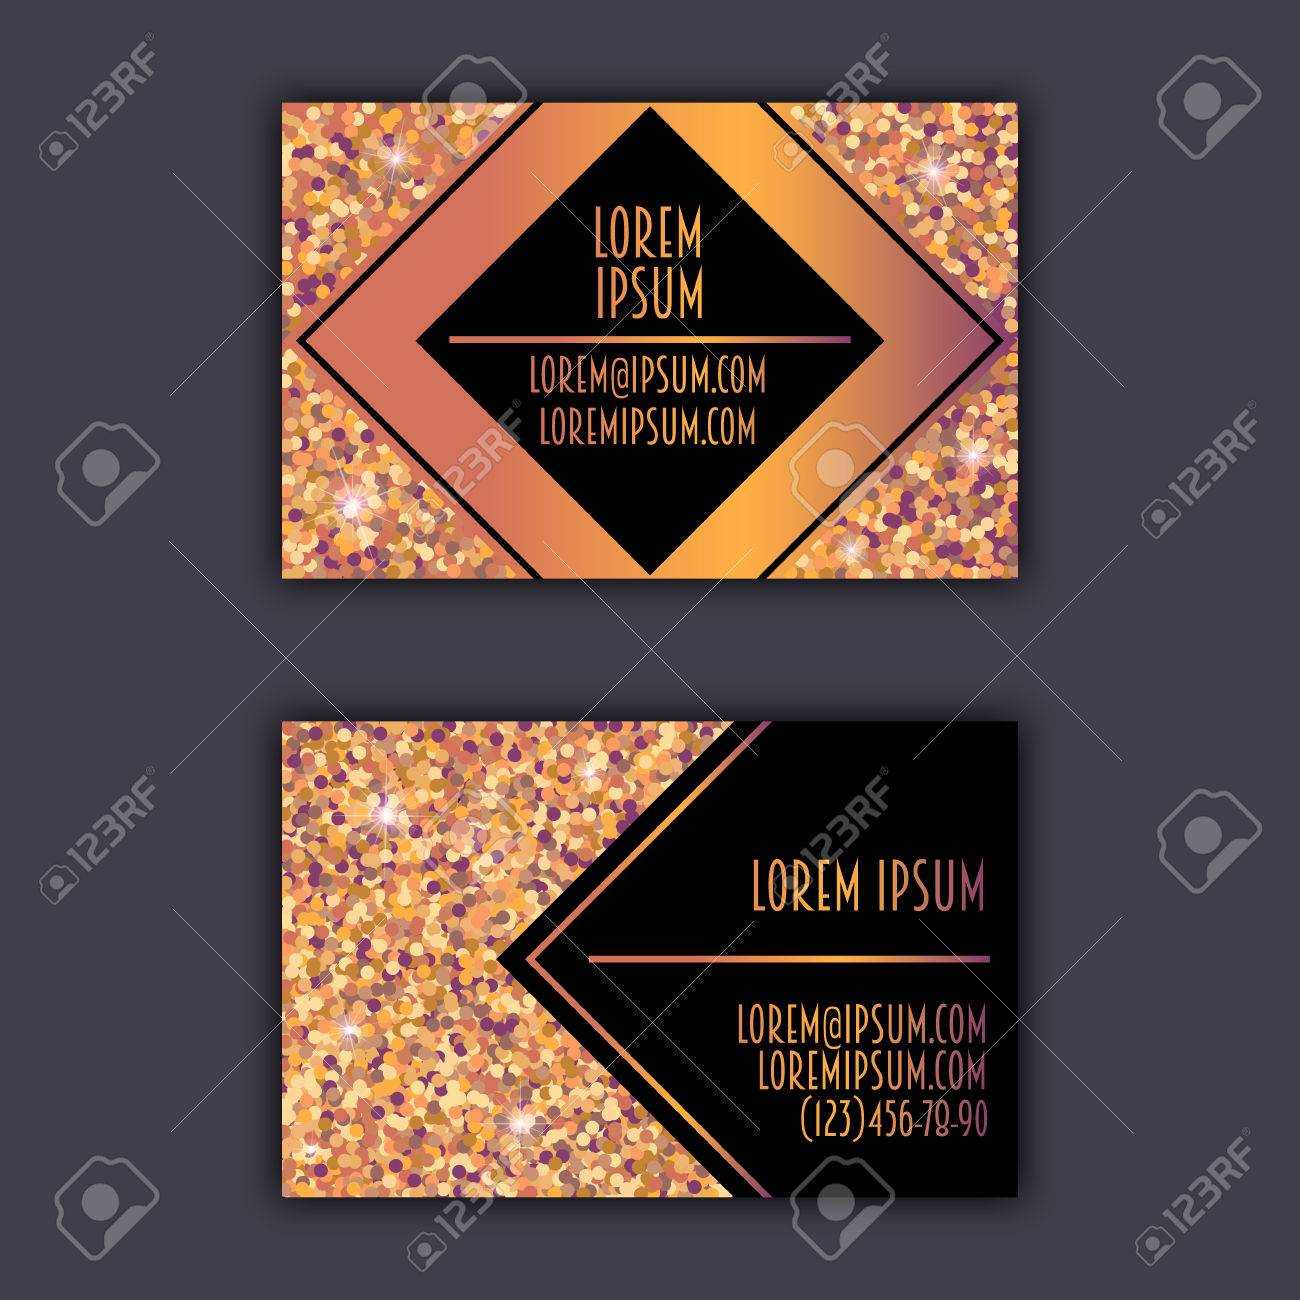 Business Card Templates With Glitter Shining Background. In Christian Business Cards Templates Free